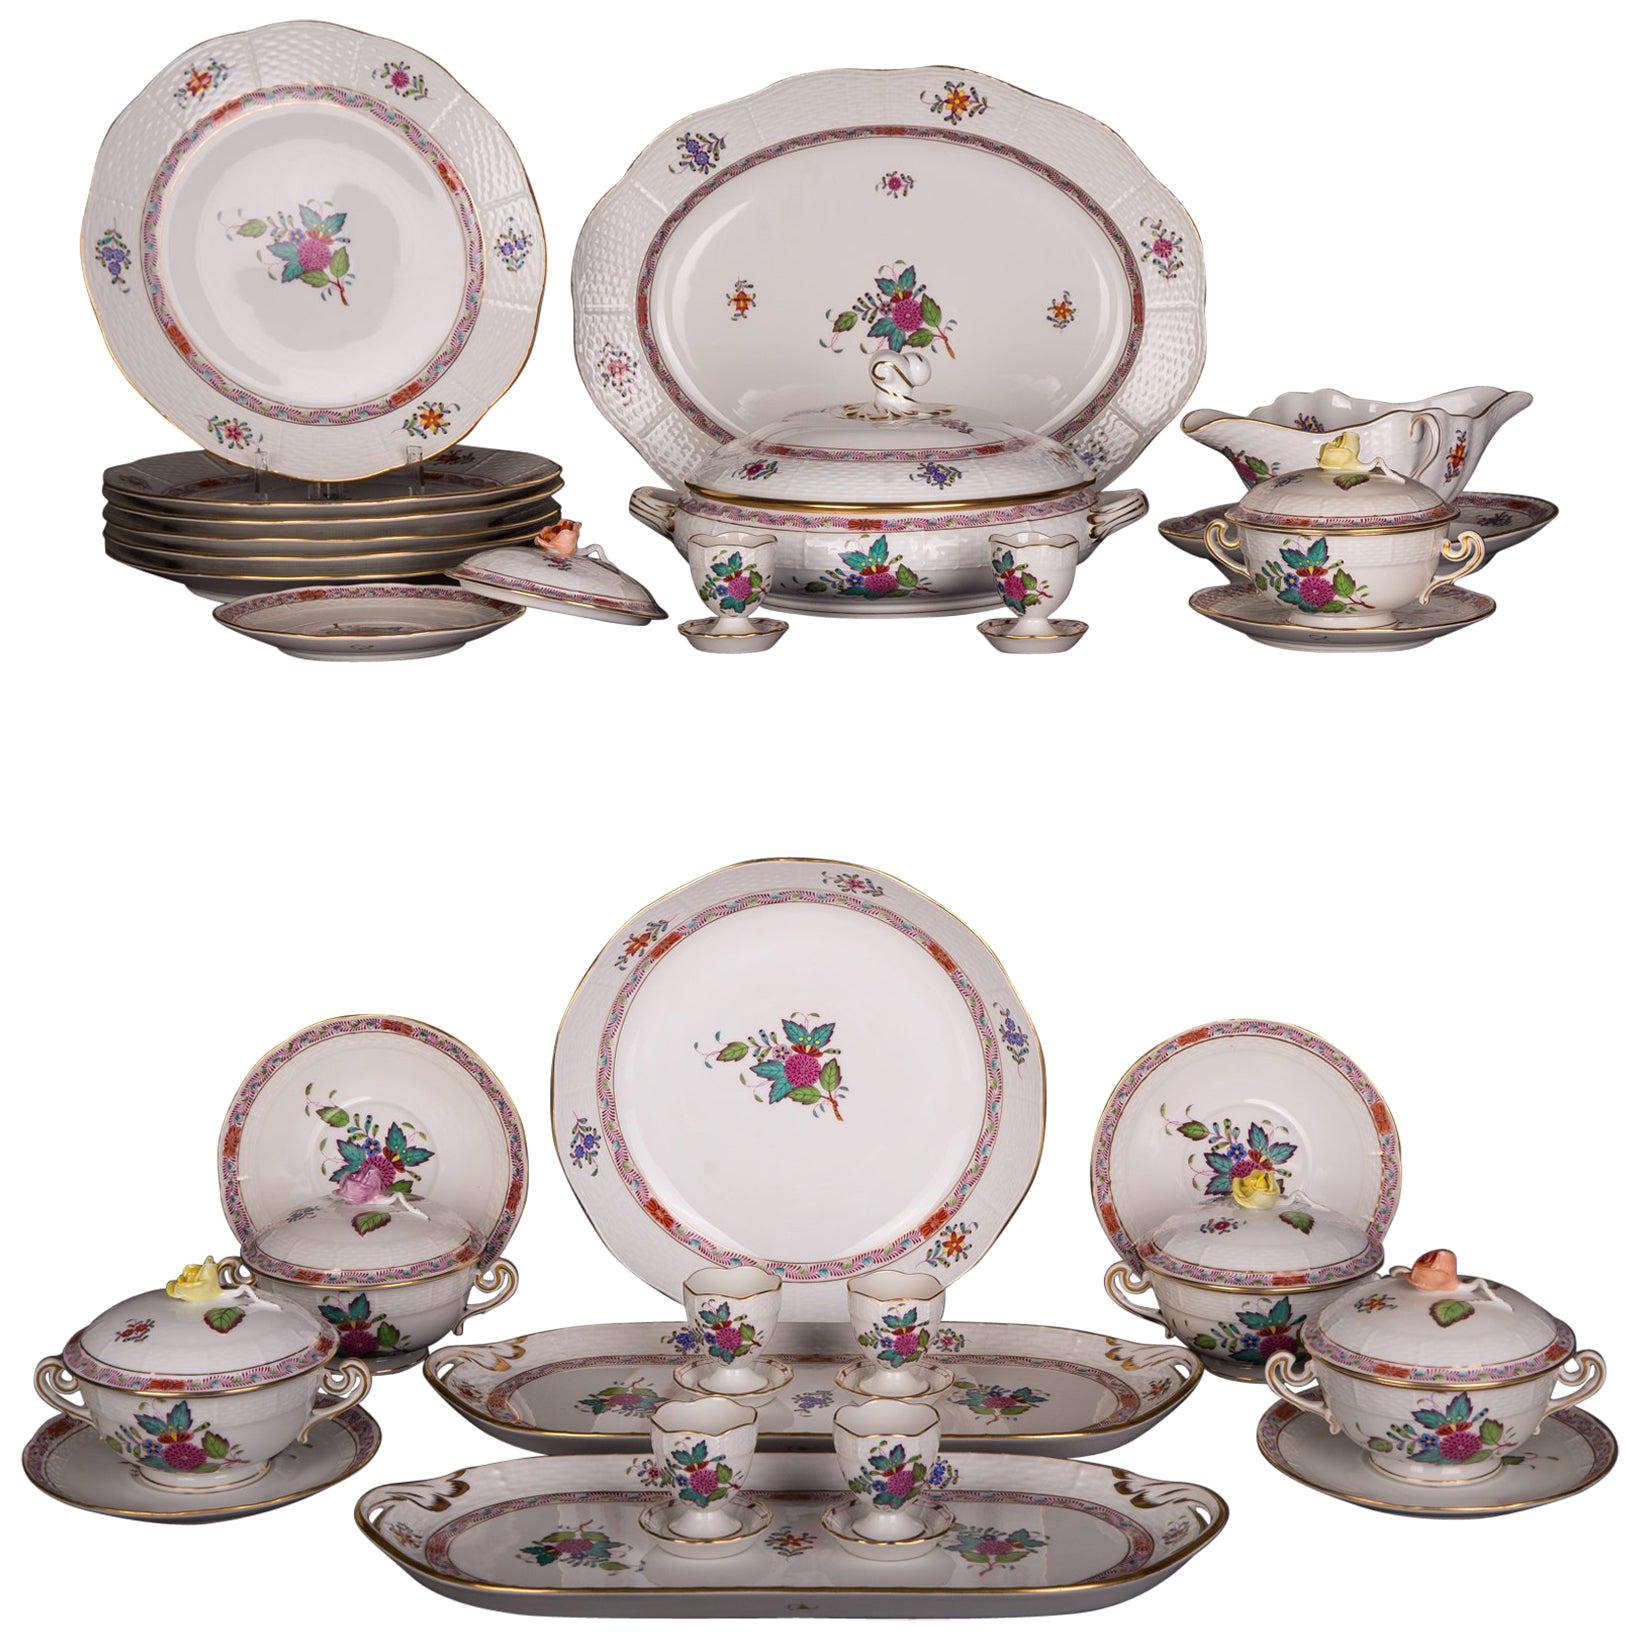 Extensive Rare Herend Dining Service Porcelain with a Lot of Flowers and Gold For Sale